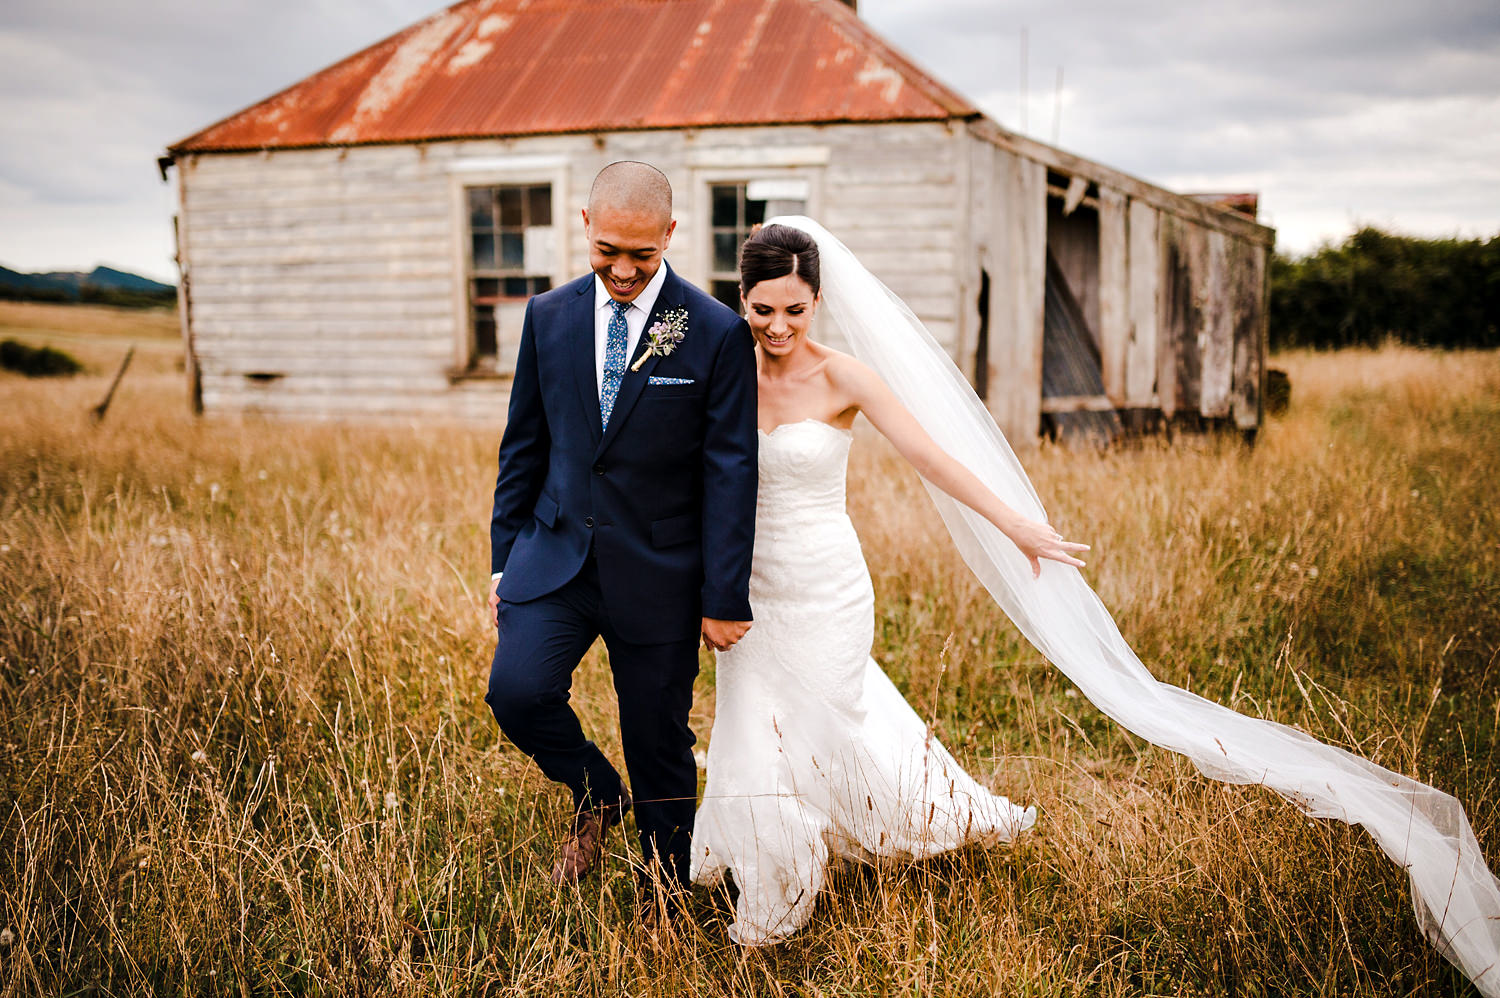 Bride and groom with shed.jpg